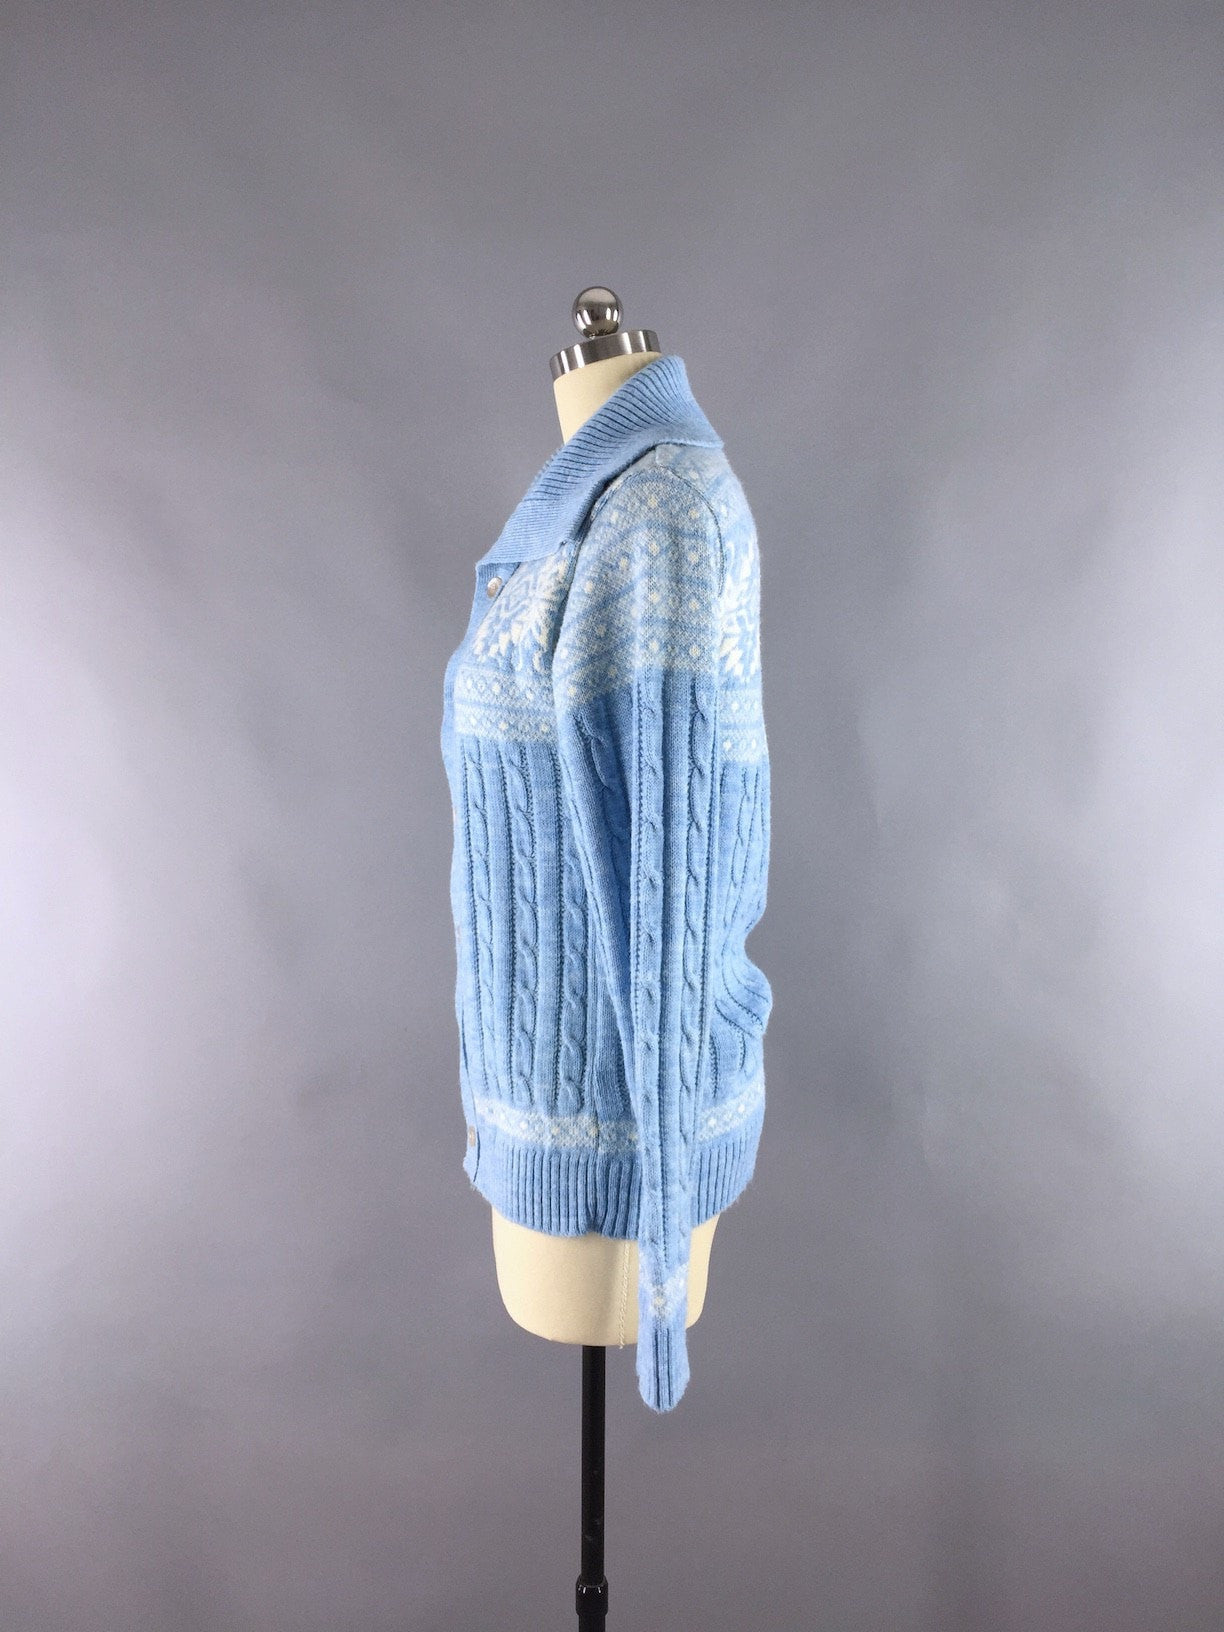 Vintage Wool Cardigan Sweater / Blue and White Snowflakes - ThisBlueBird